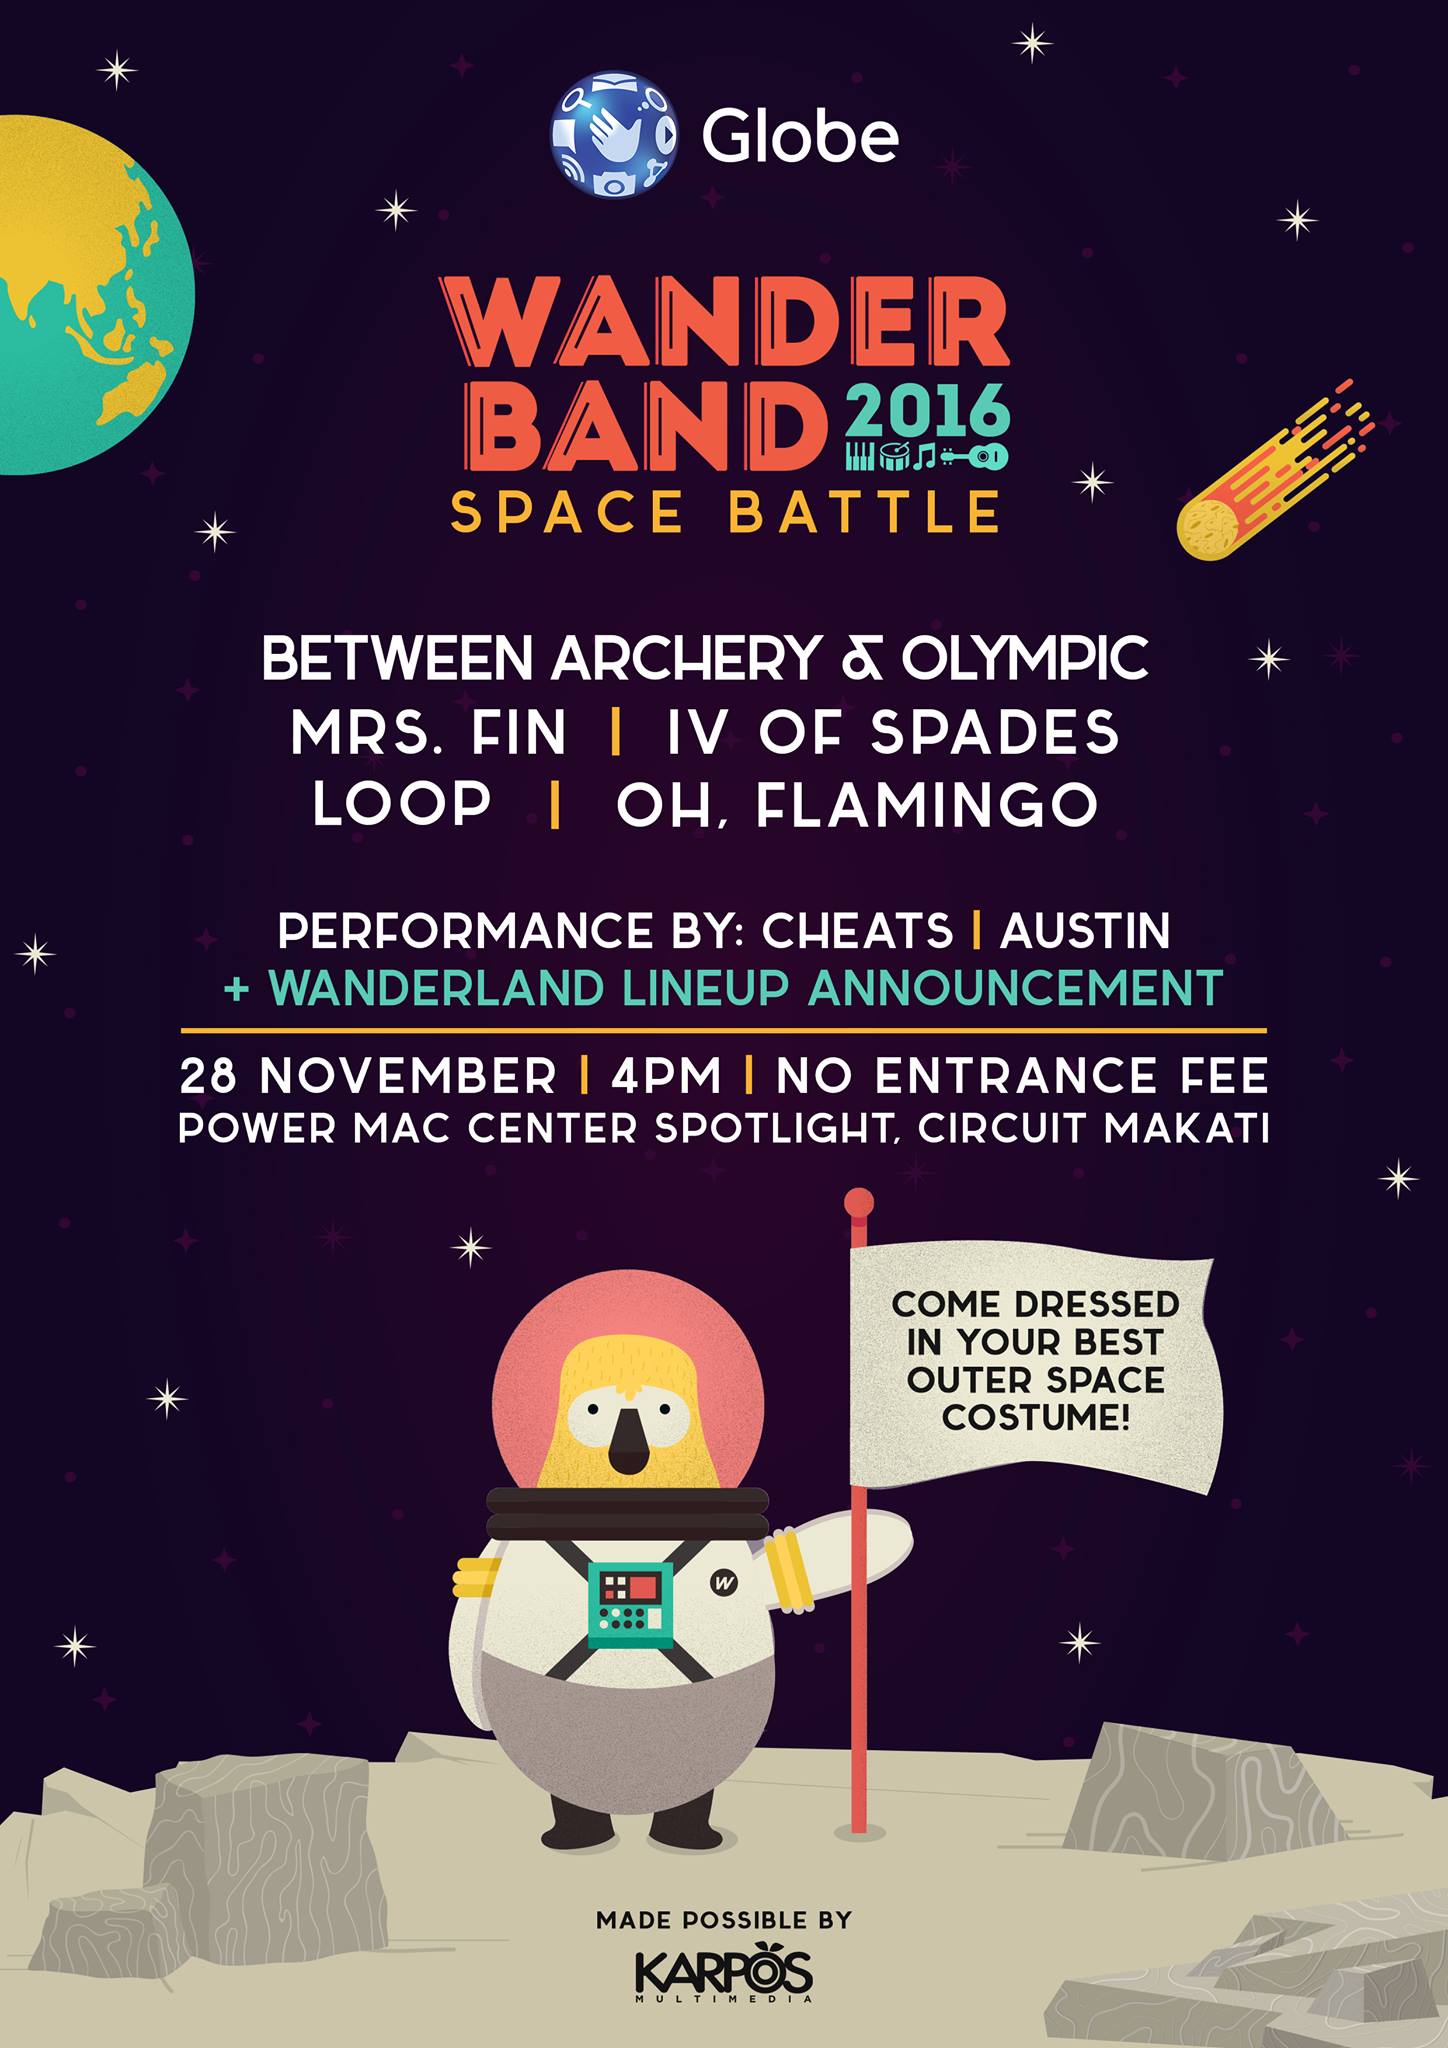 WANDERBAND: SPACE BATTLE clock Saturday, November 28 at 4:00pm 2 days from now · 90°F / 76°F Partly Cloudy pin Show Map Power Mac Center Spotlight Circuit, Makati, Philippines